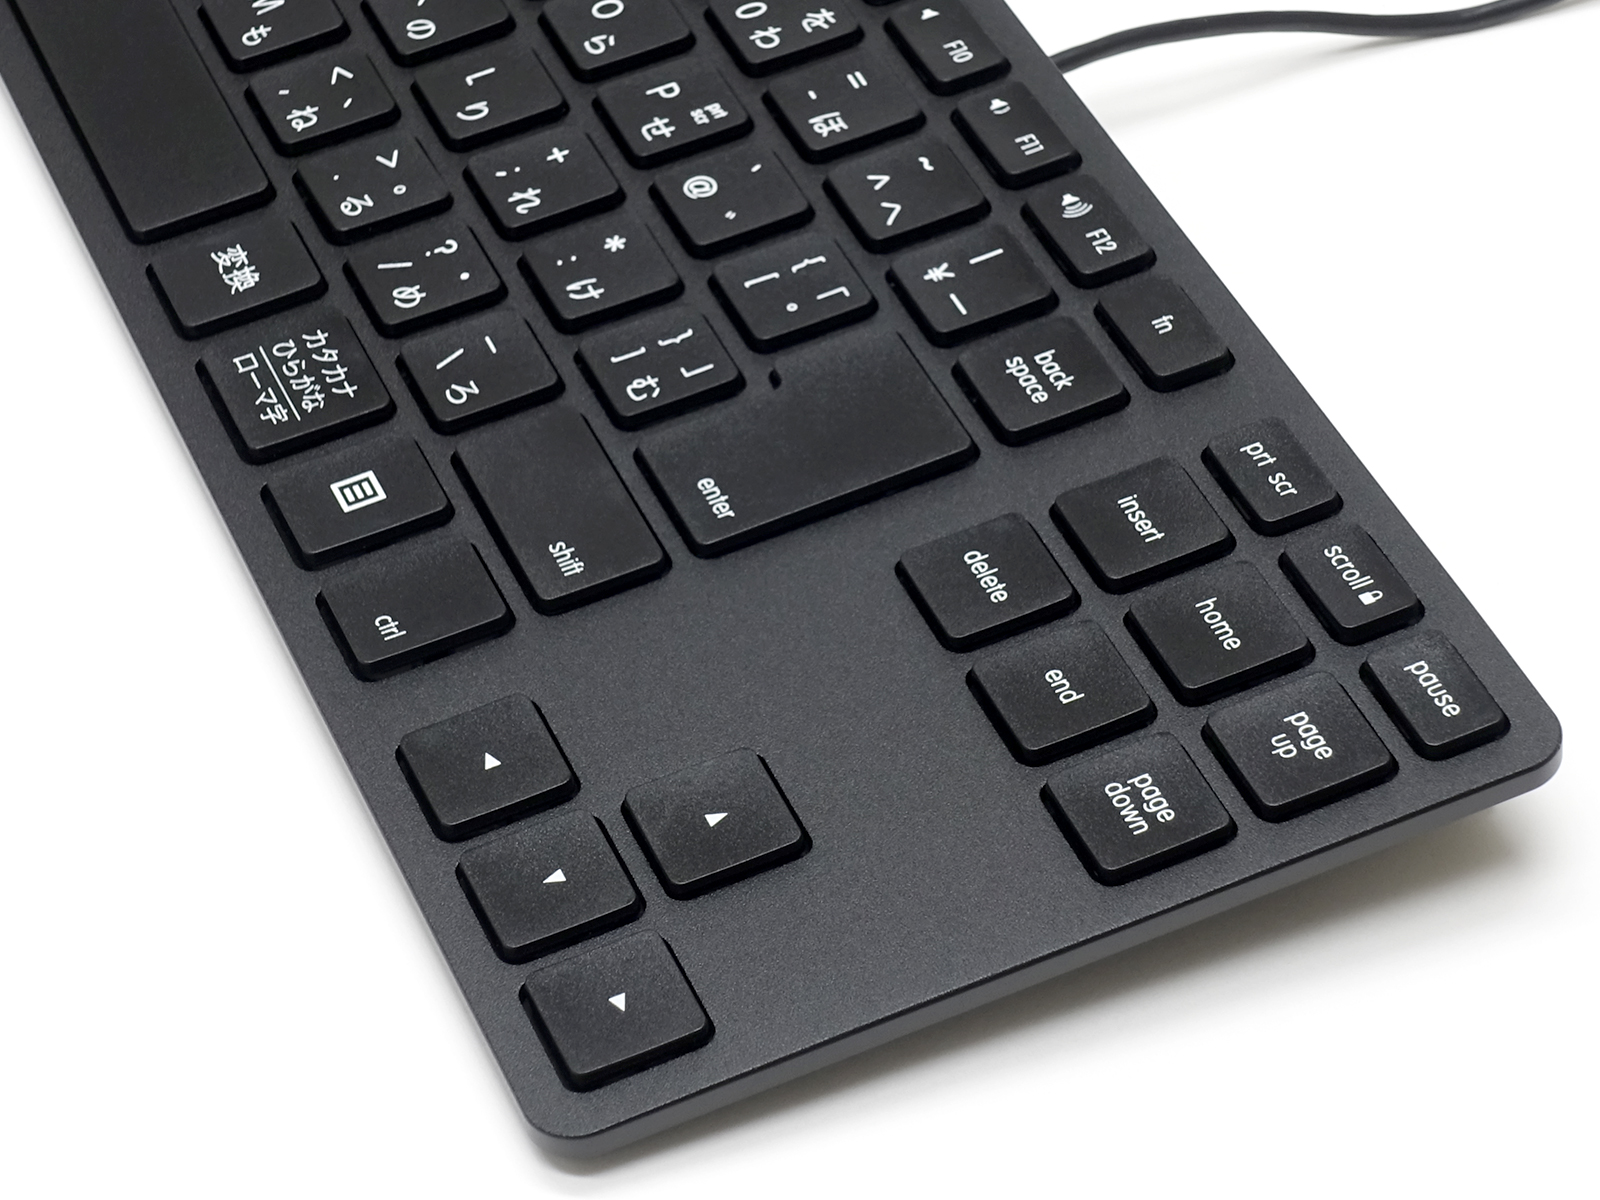 Matias Wired Aluminum Tenkeyless keyboard for PC: image 3 of 6 thumb